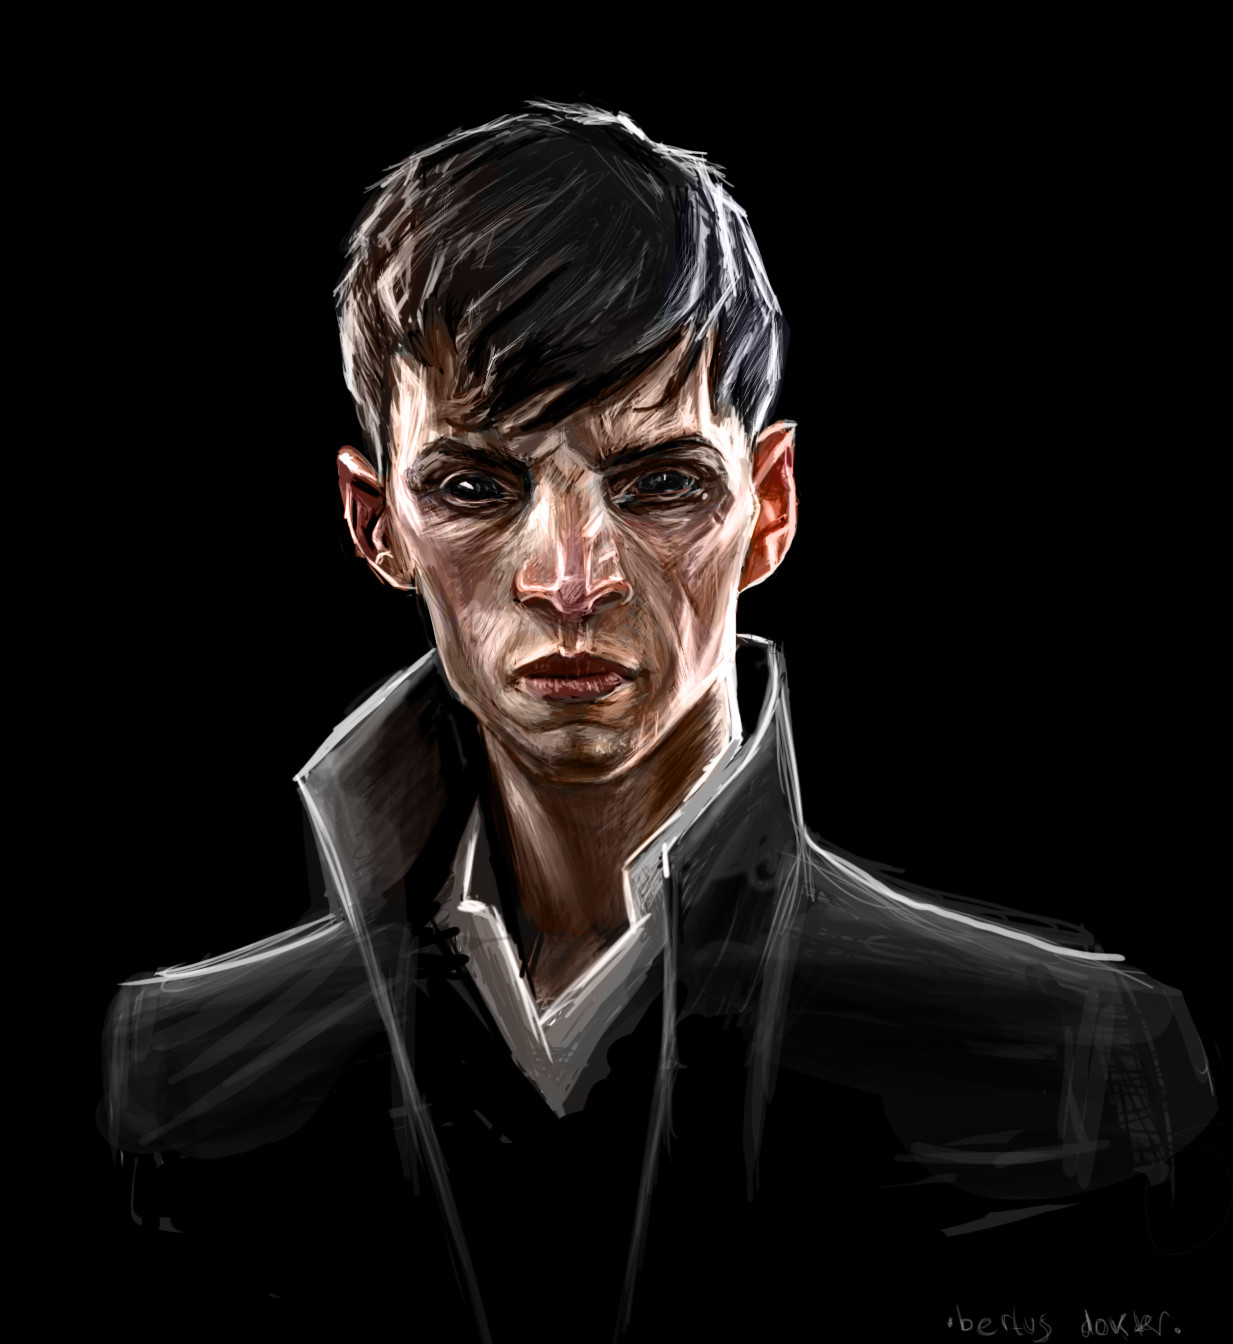 Dishonored - The Outsider painting study.